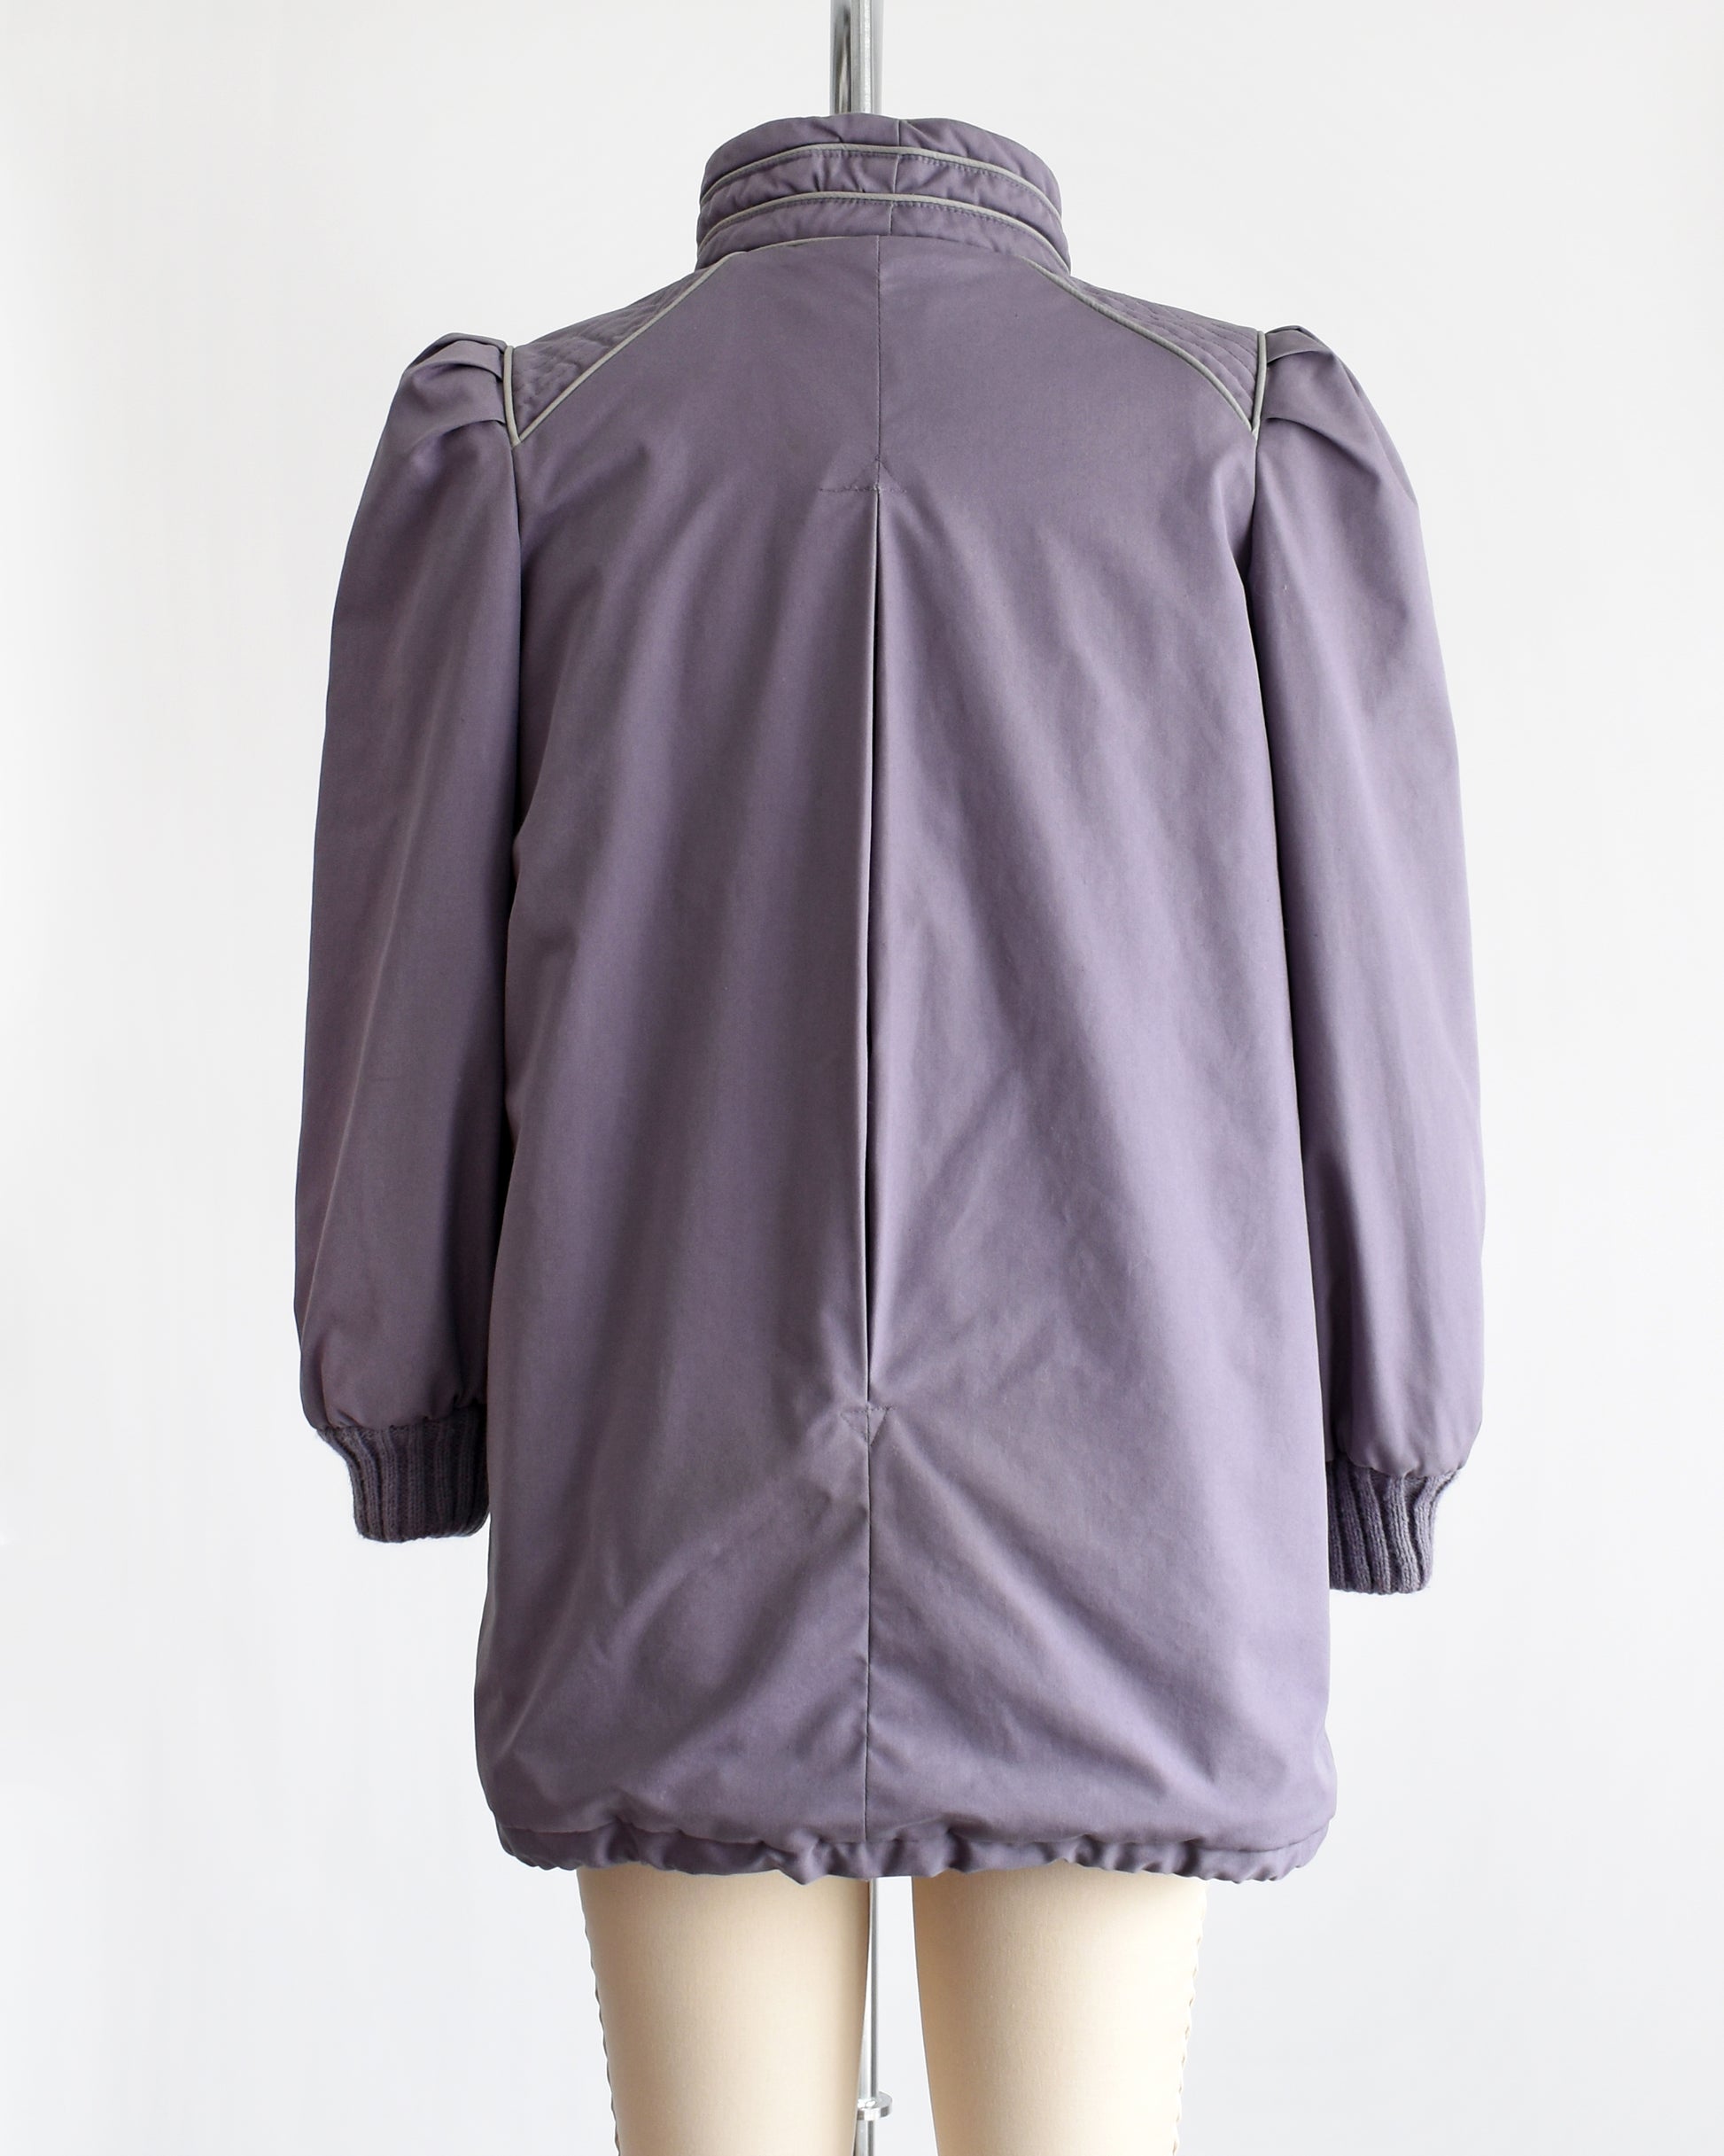 Back view of a vintage 1980s purple puffy coat with shawl style collar with gray trim